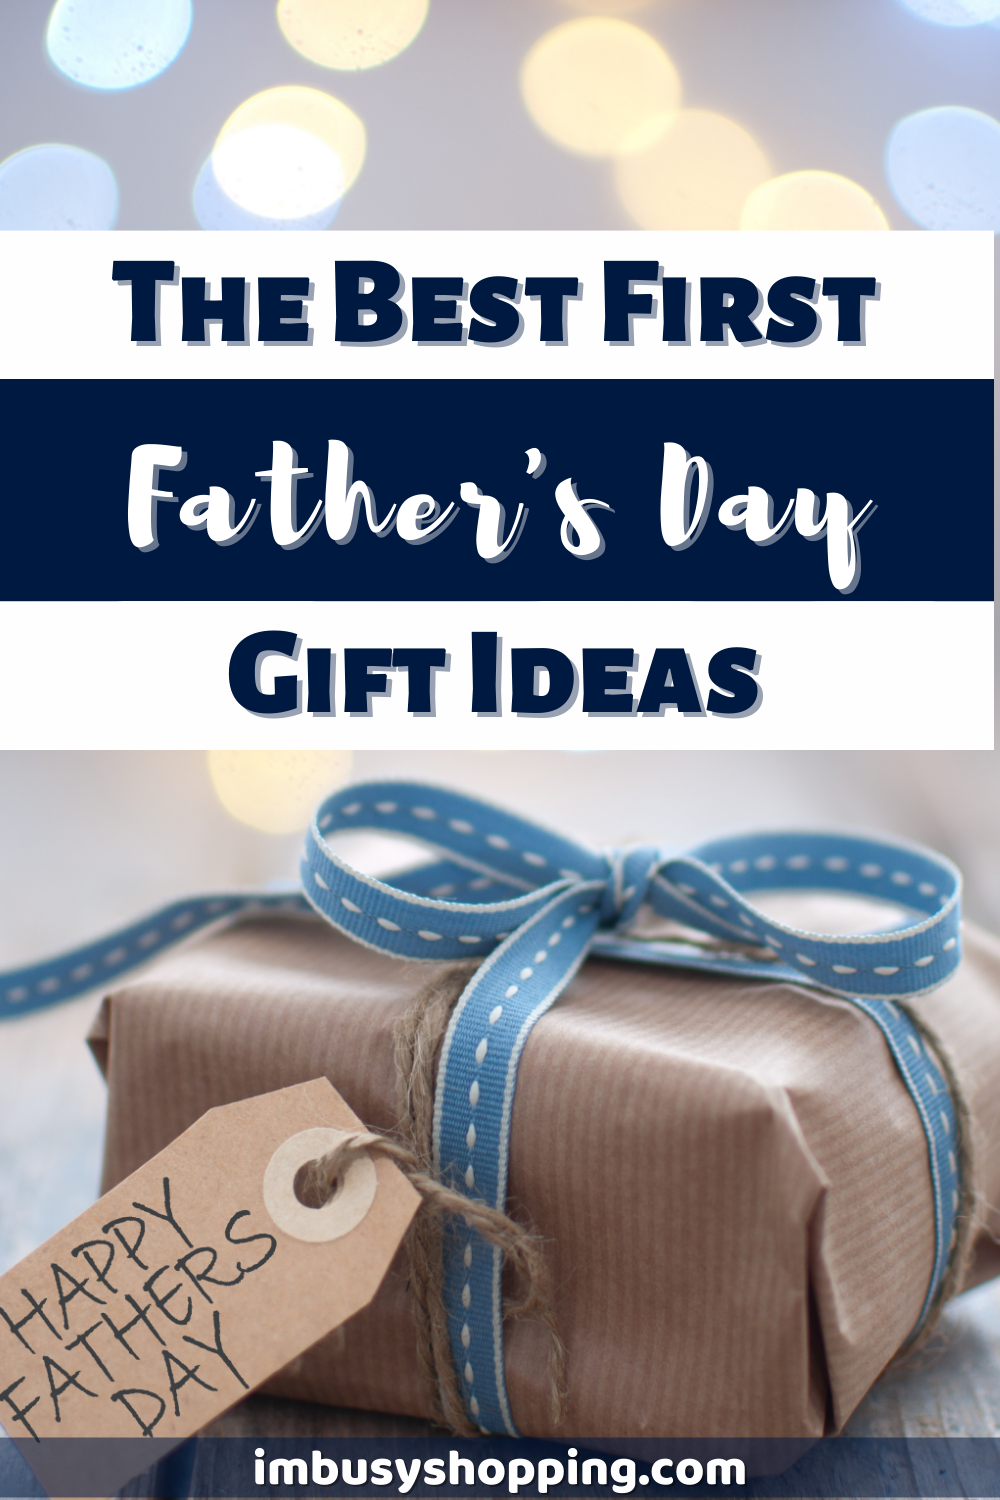 gift wrapped in brown paper with blue cloth ribbon and a tag saying "happy fathers day", with a tagline of "Tje Best First Fathers Day Gift Ideas"